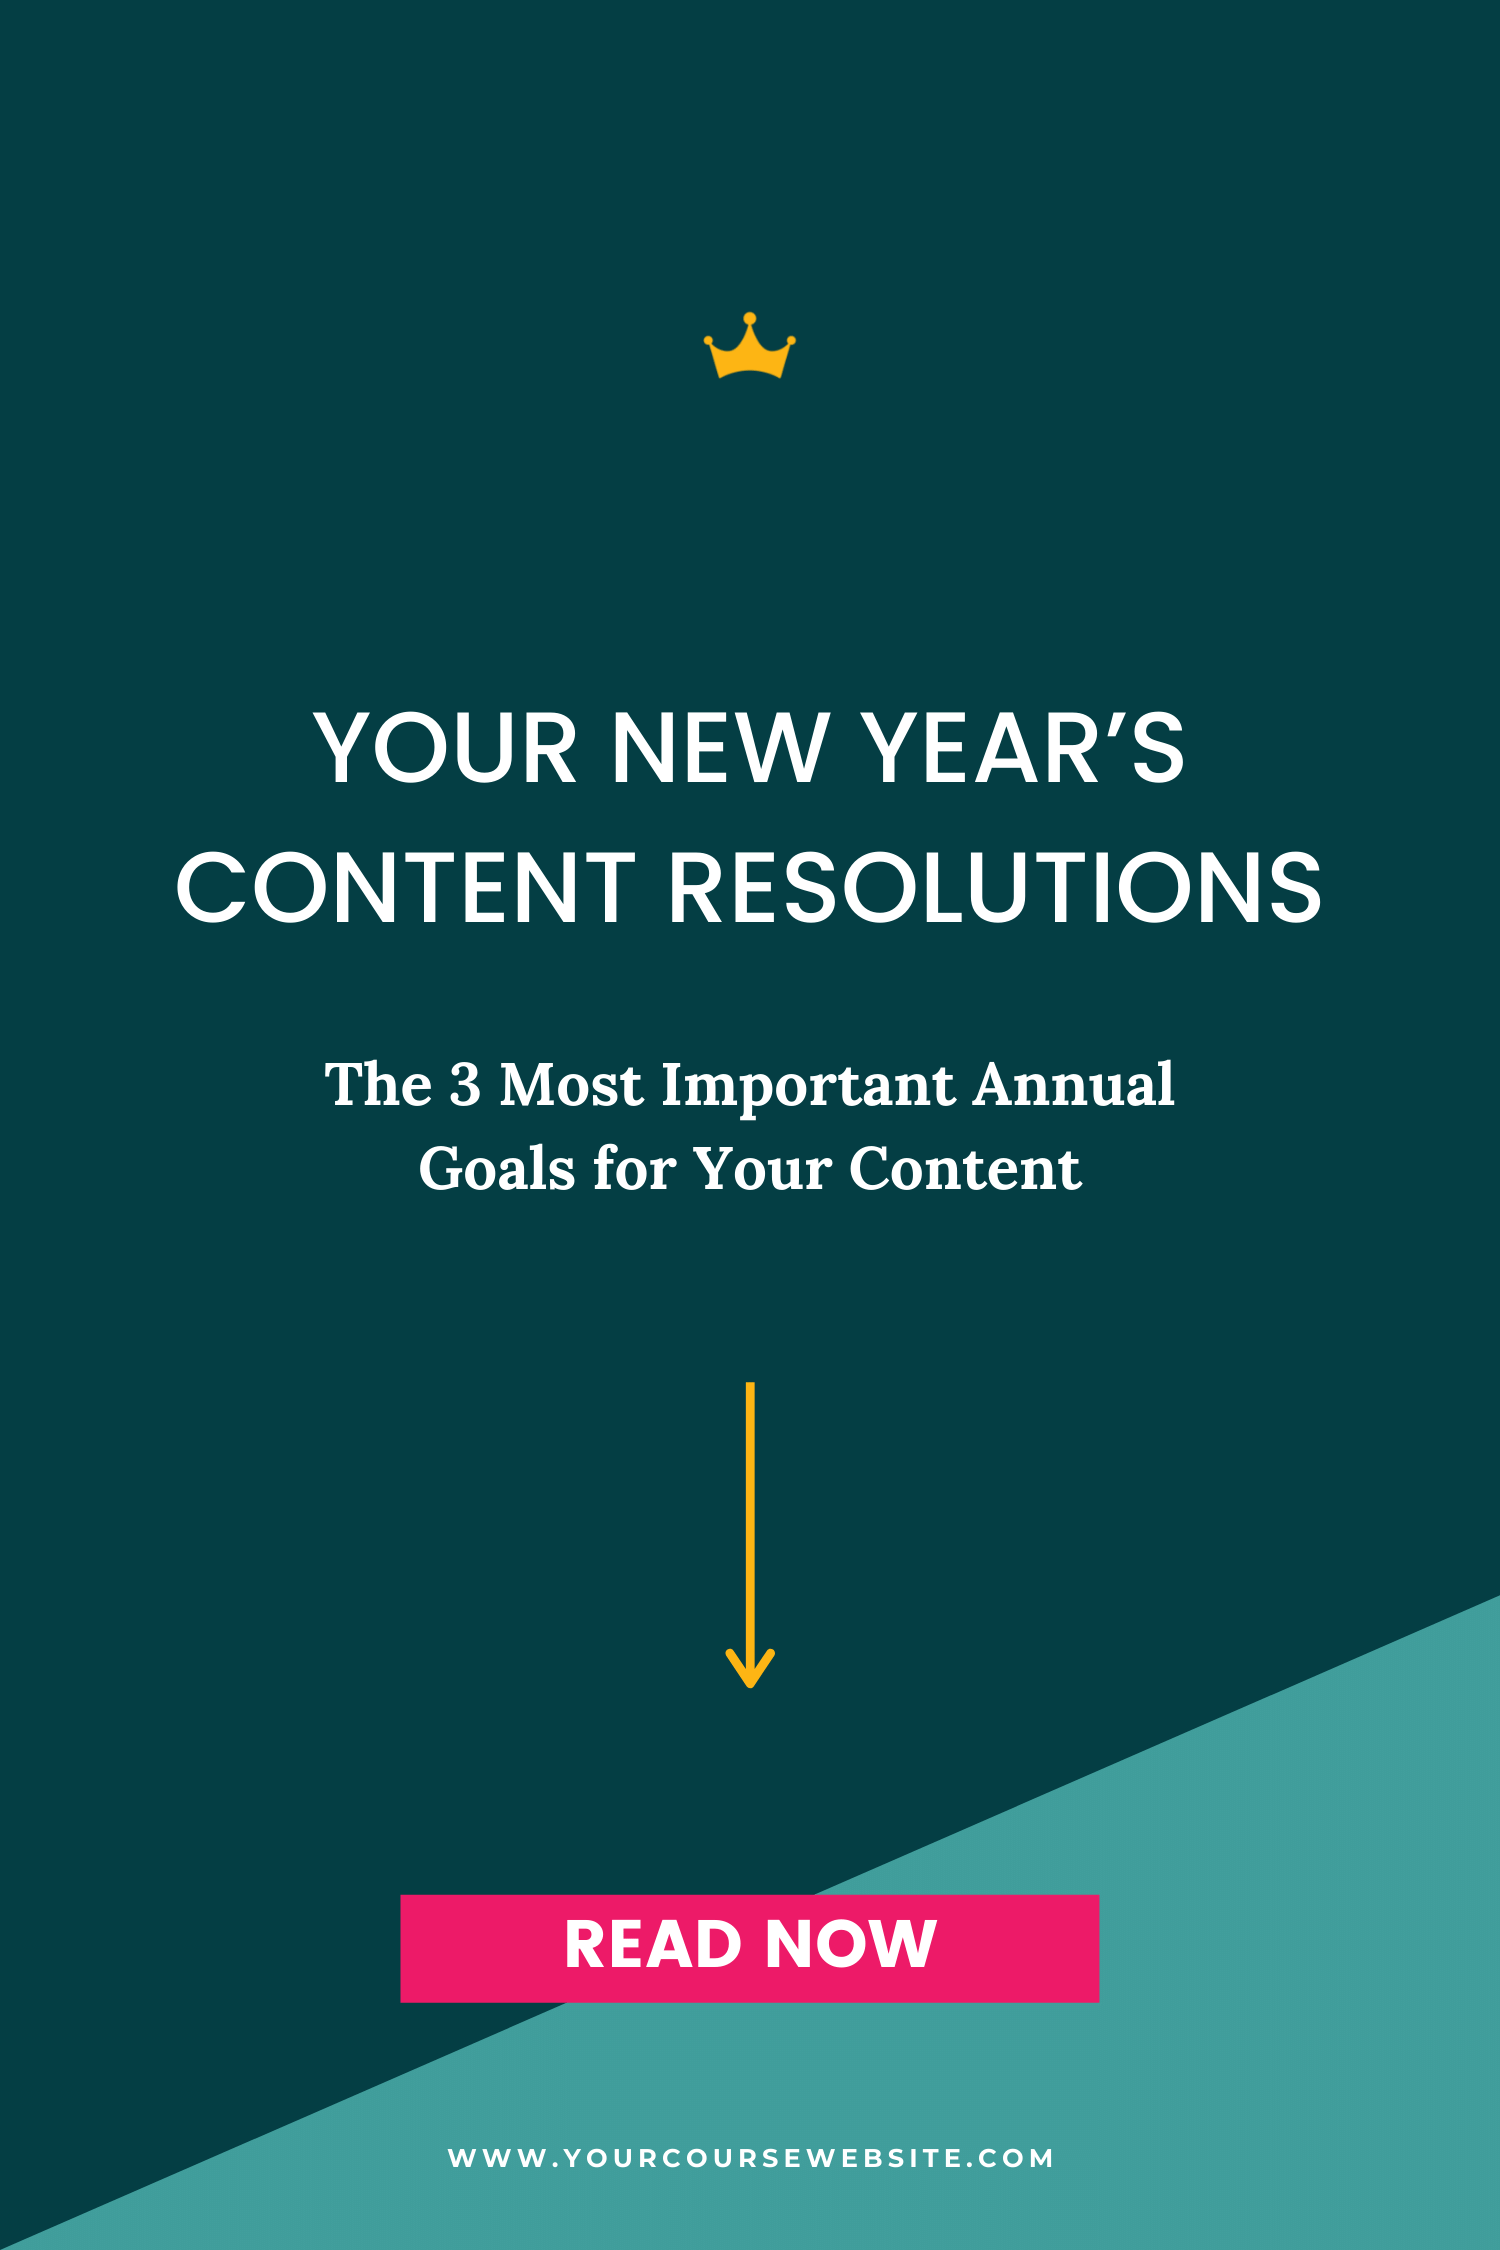 Your New Year’s Content Resolutions